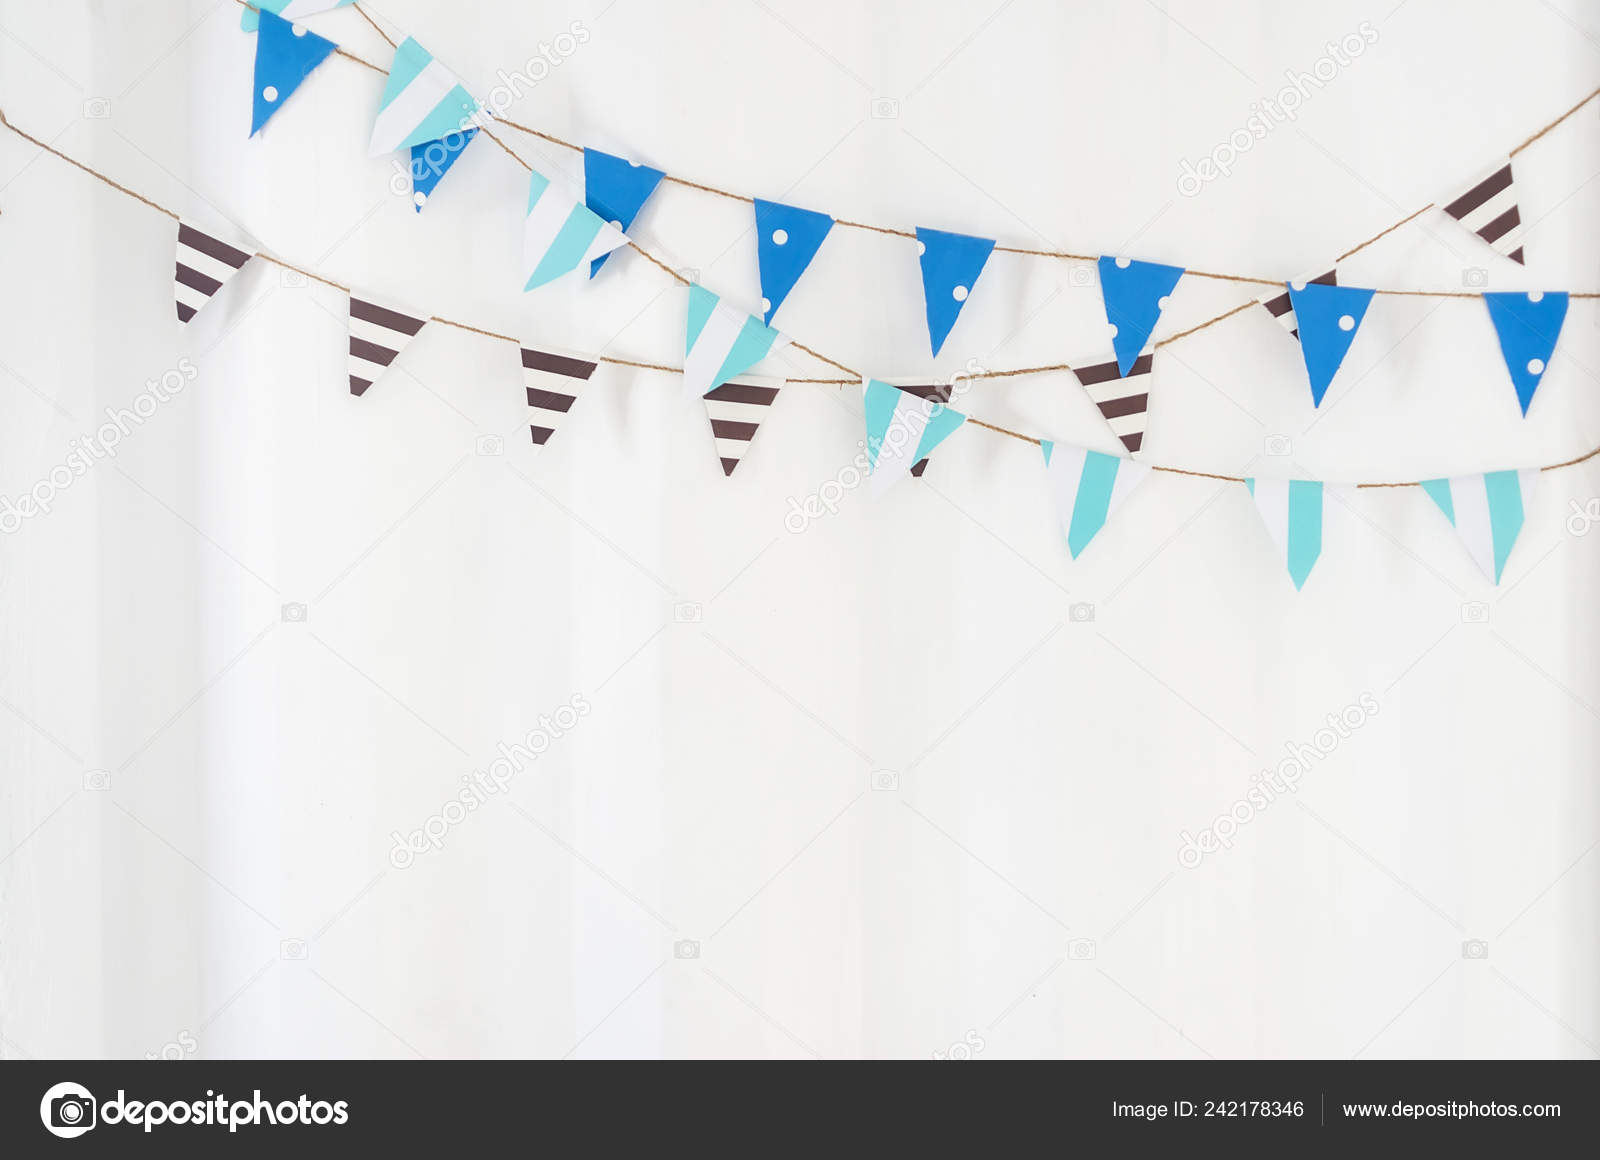 Triangle Flag Fabric Hanging Rope White Wall Stock Photo by